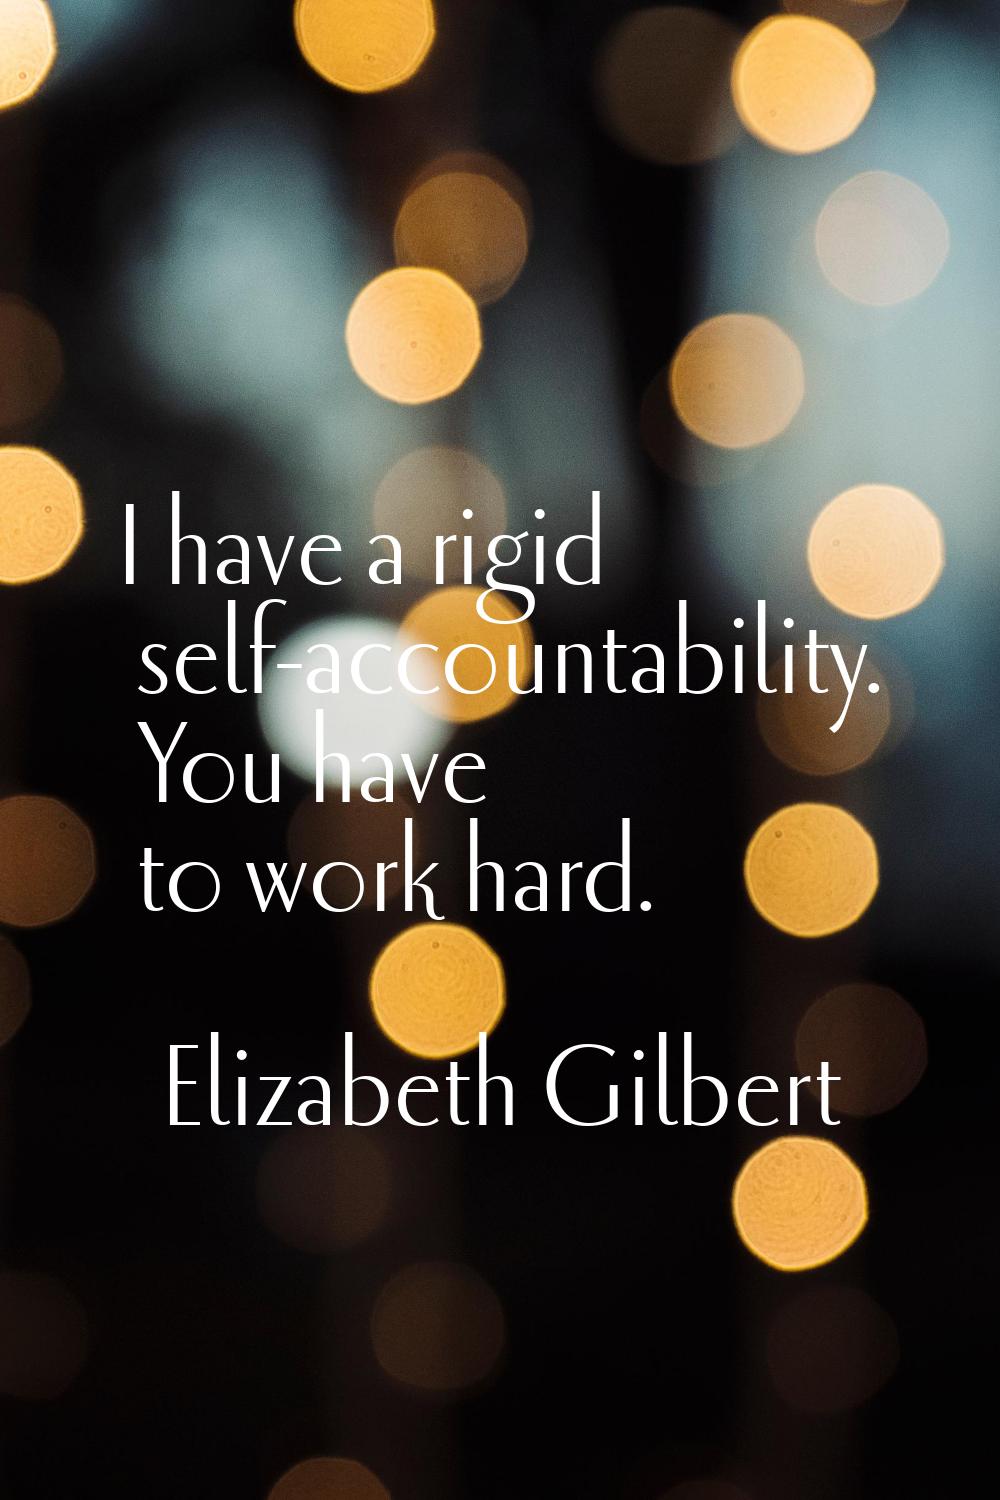 I have a rigid self-accountability. You have to work hard.